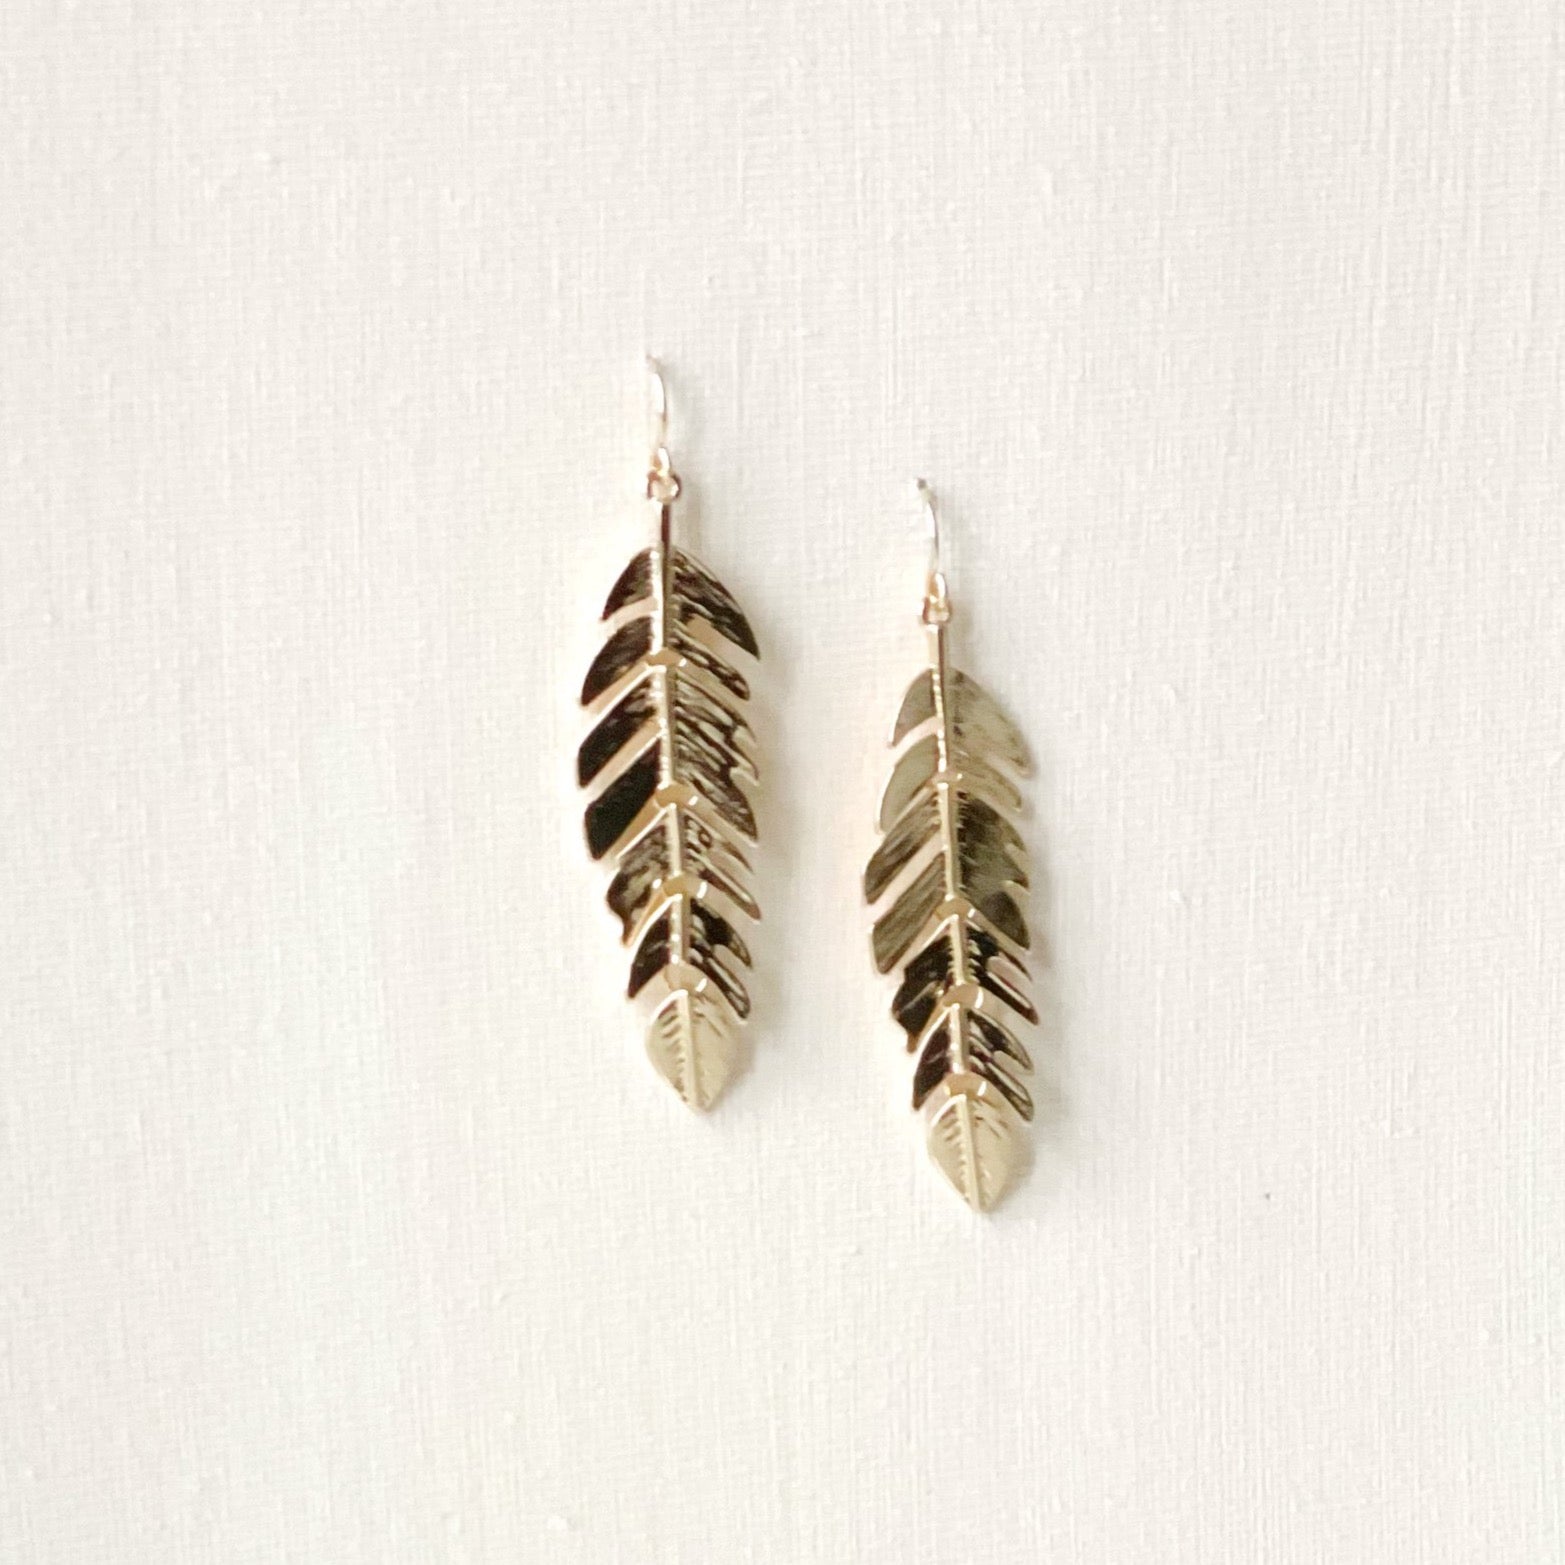 Evangelina Gold Feather Earrings